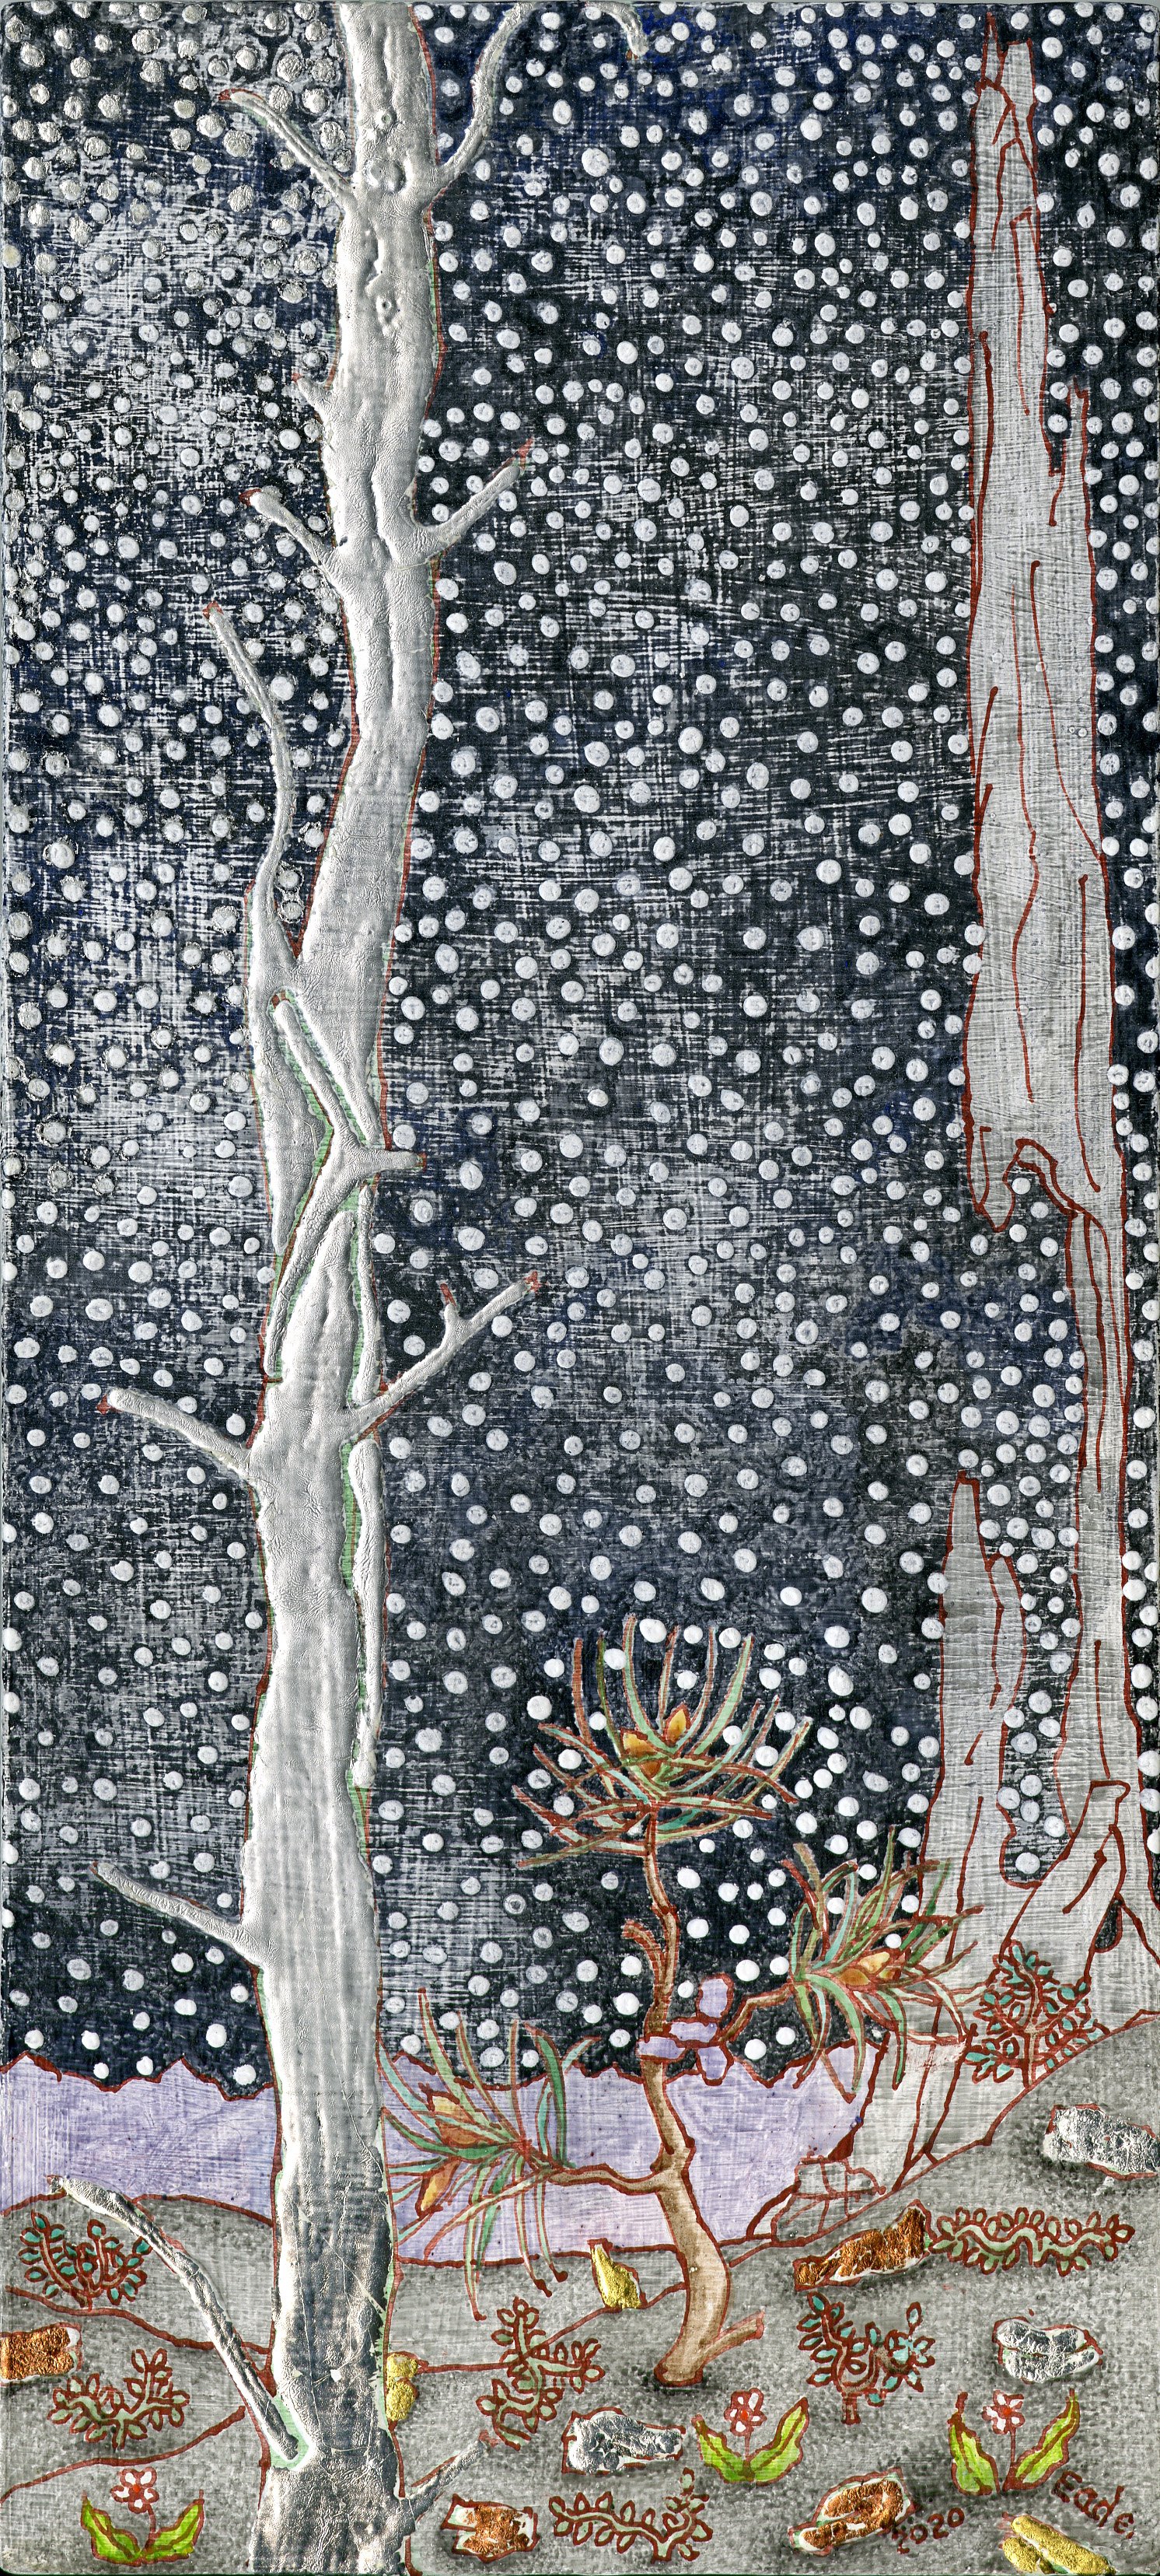  Michael Eade,  A Very Starry Night (Study), No. 1,  2020. Egg tempera, raised 22k gold leaf, raised copper and aluminum leaf on wood panel. 11 x 5 inches @Michael Eade, courtesy of Fou Gallery 